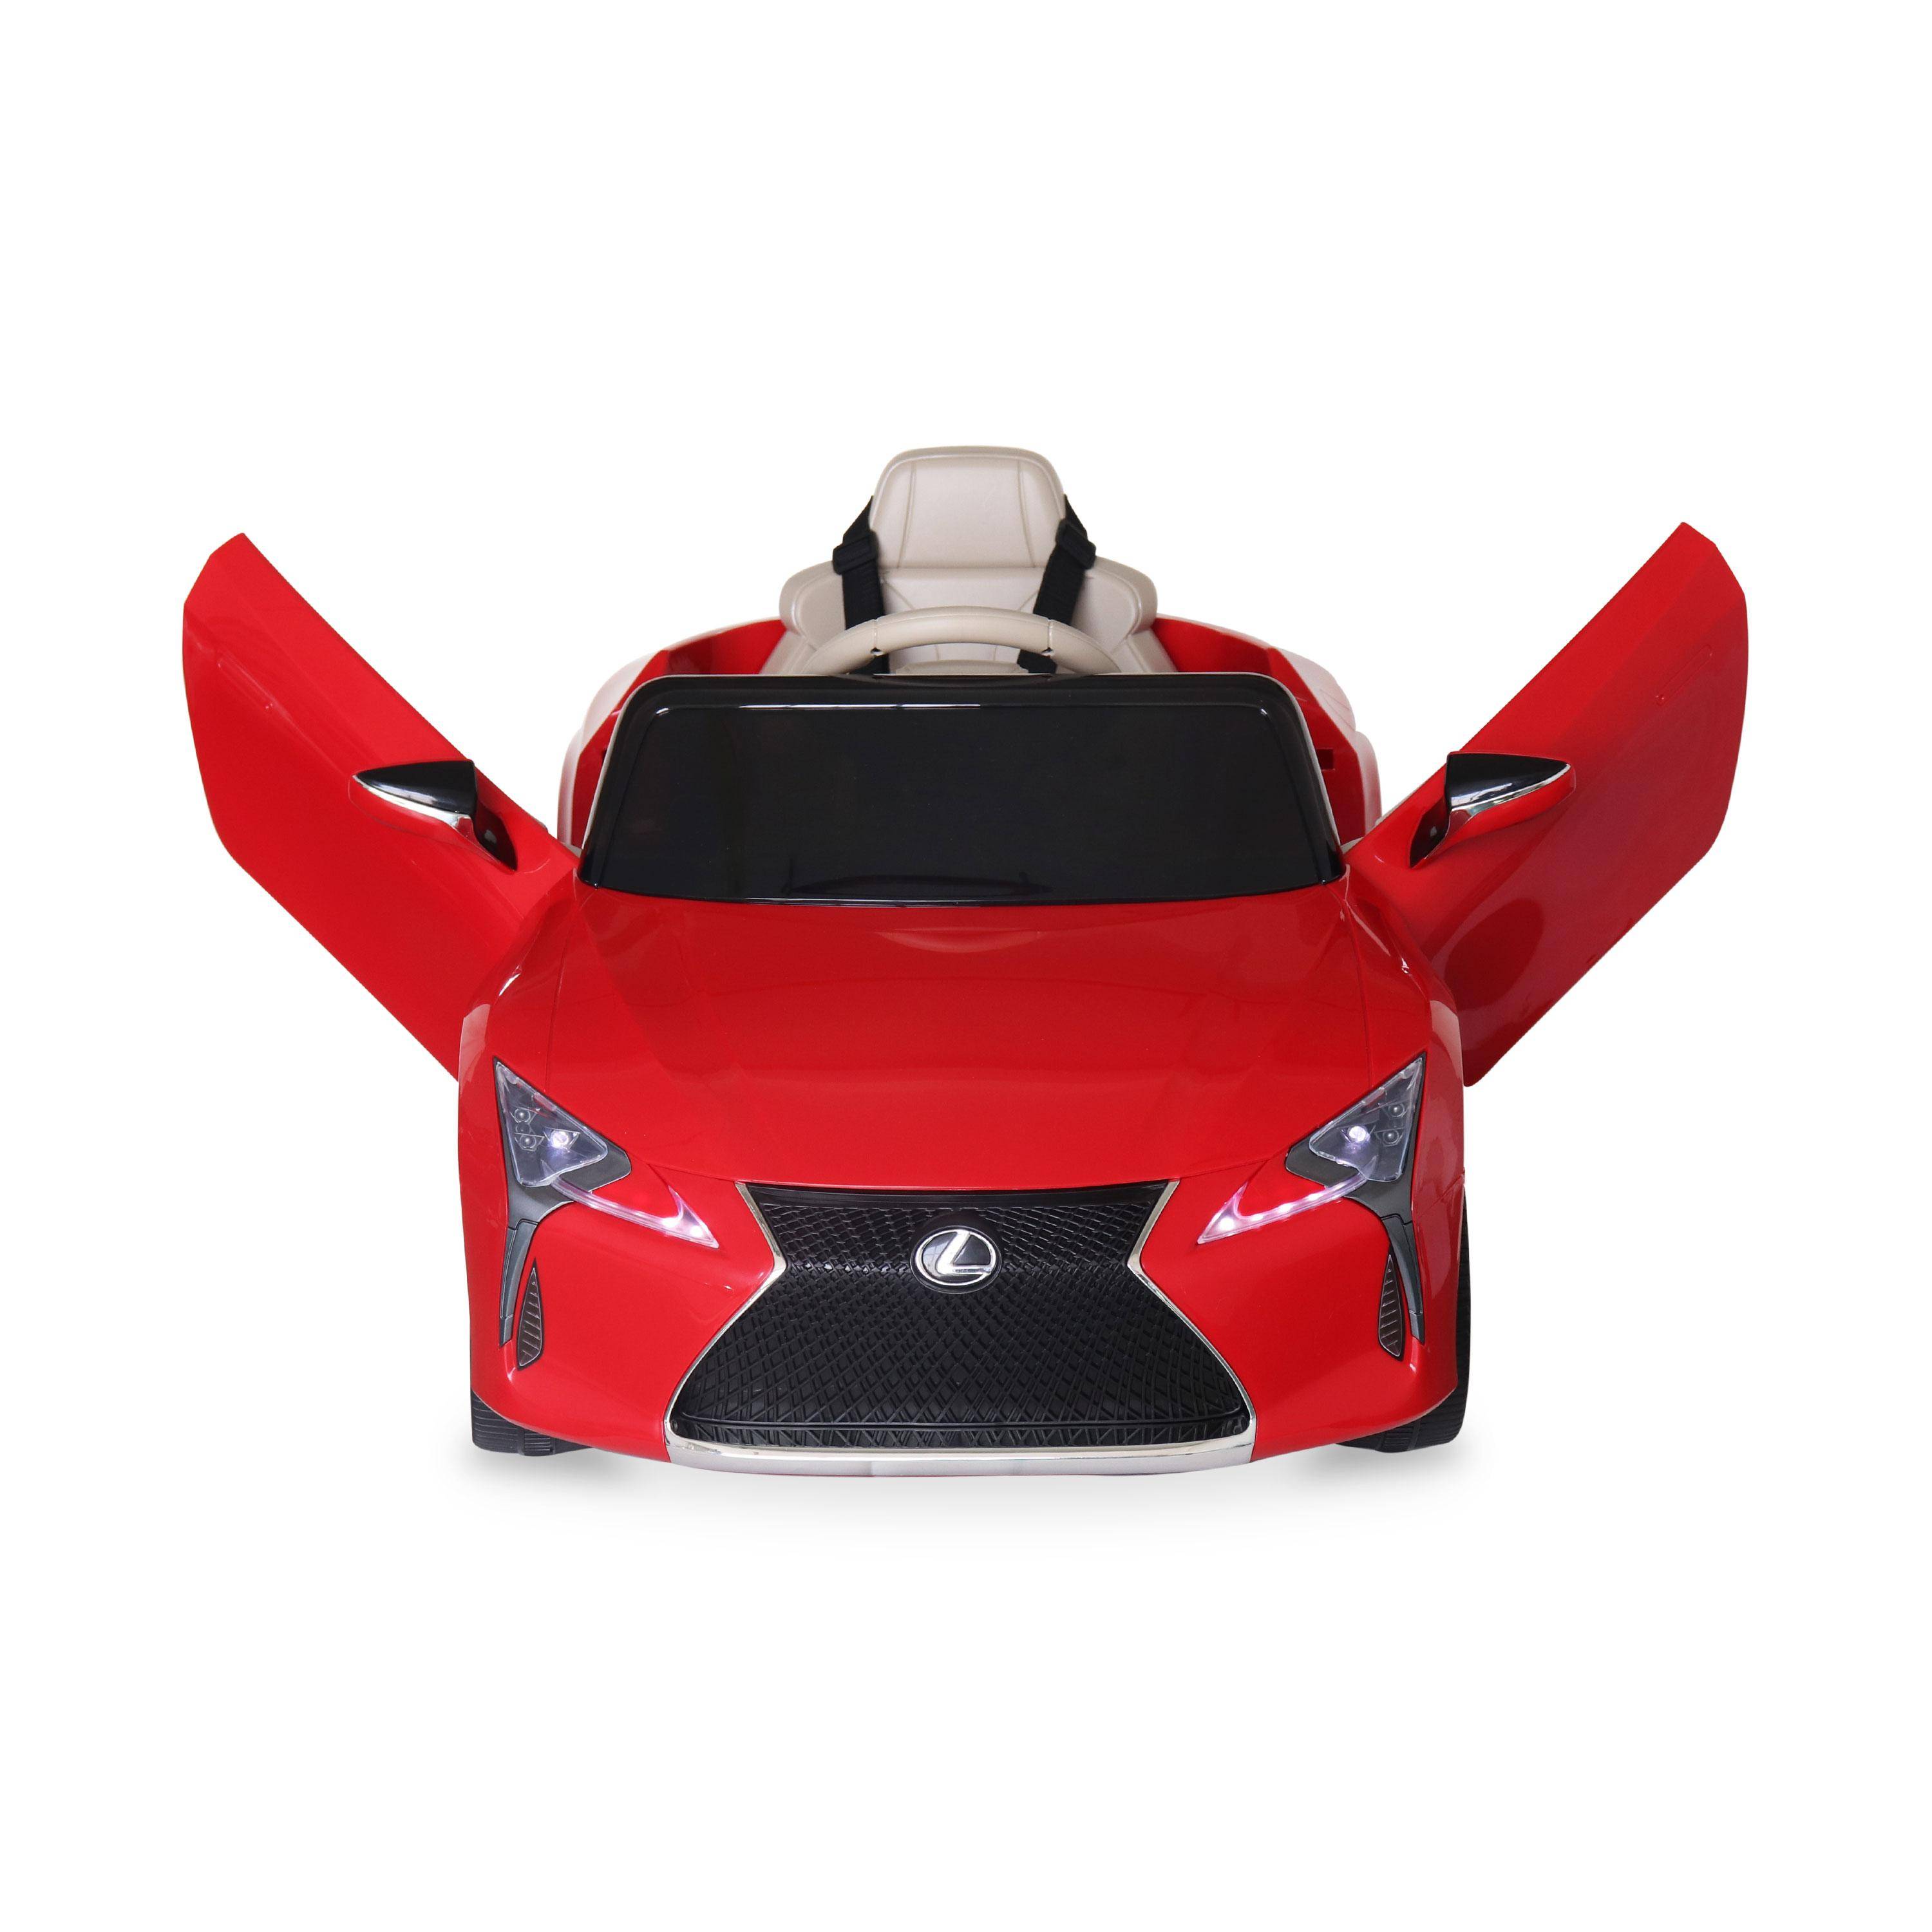 Children's electric car 12V, 1 seat, 4x4 with car radio and remote control - Lexus LC500 - Red,sweeek,Photo4